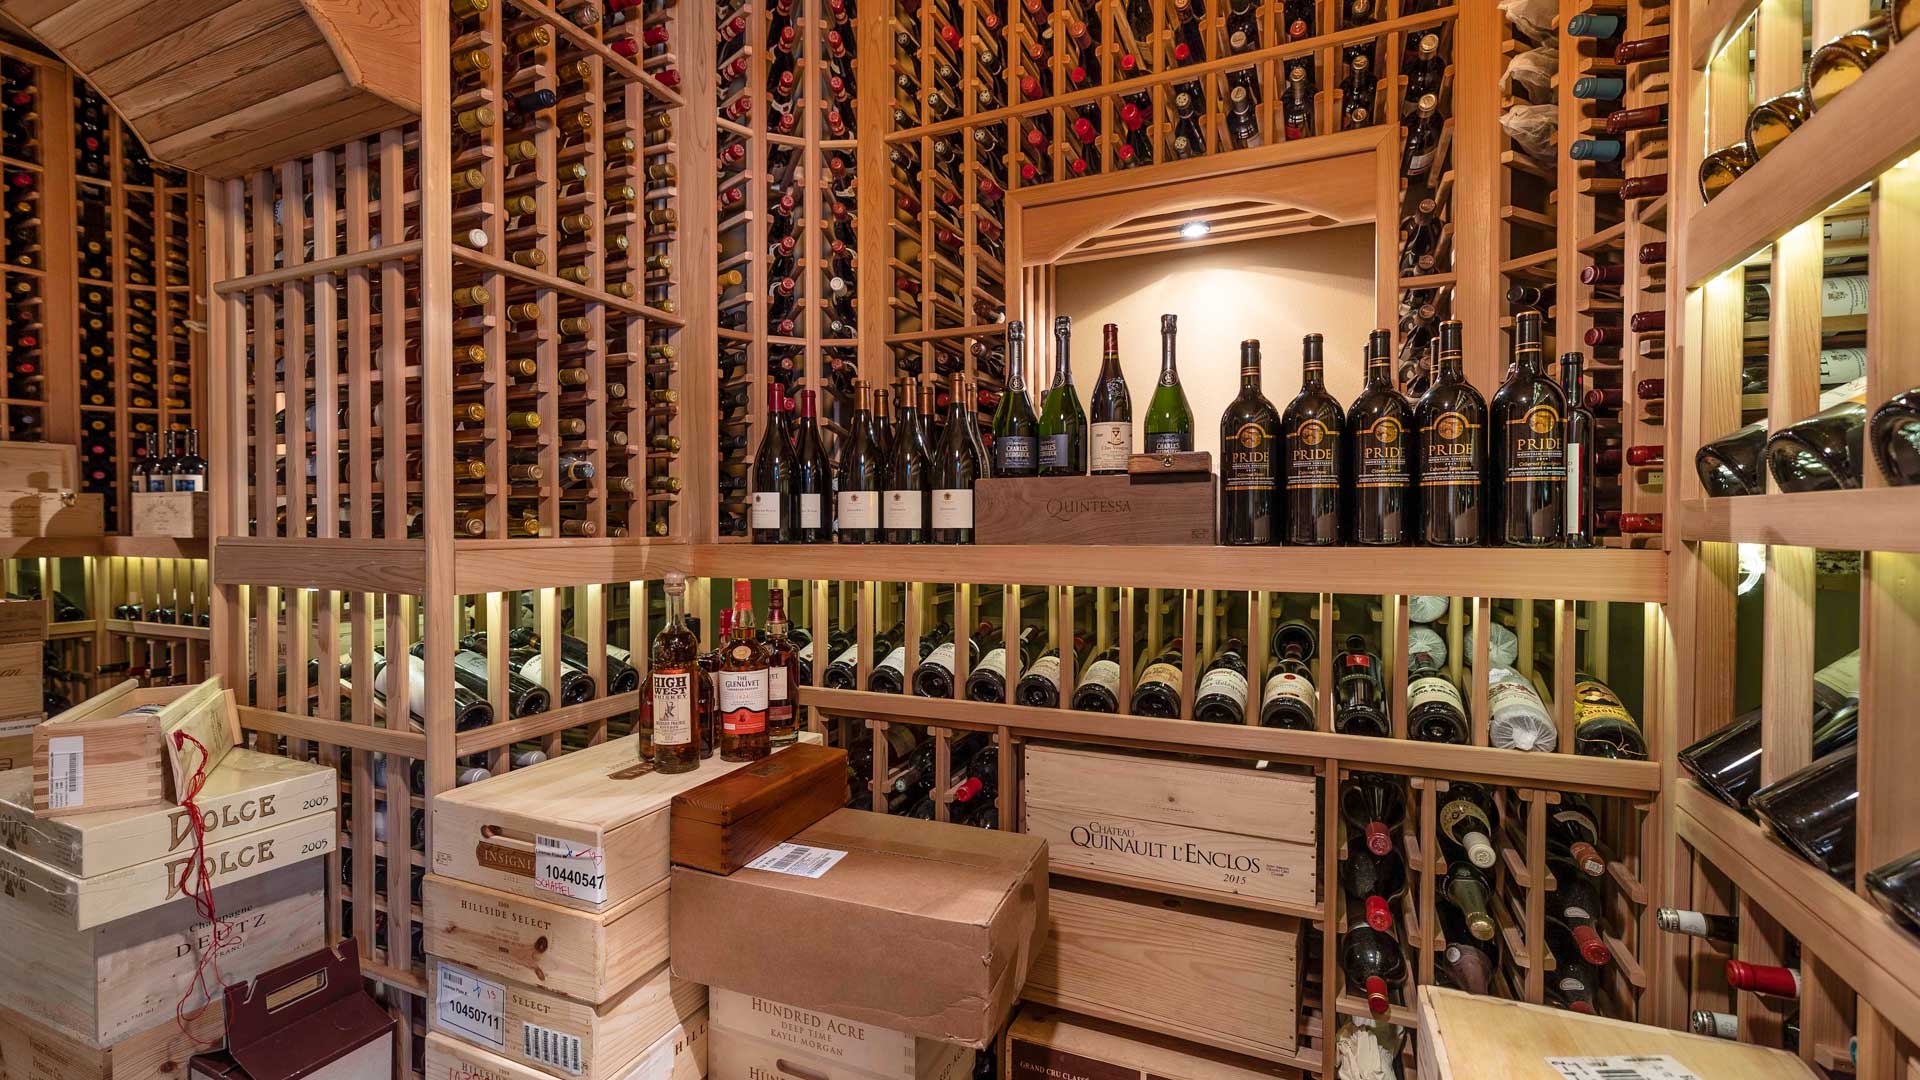 Alberdi's wine collection is dominated by Bordeaux and old-world selections. (Photography by Gabriel Burgos)